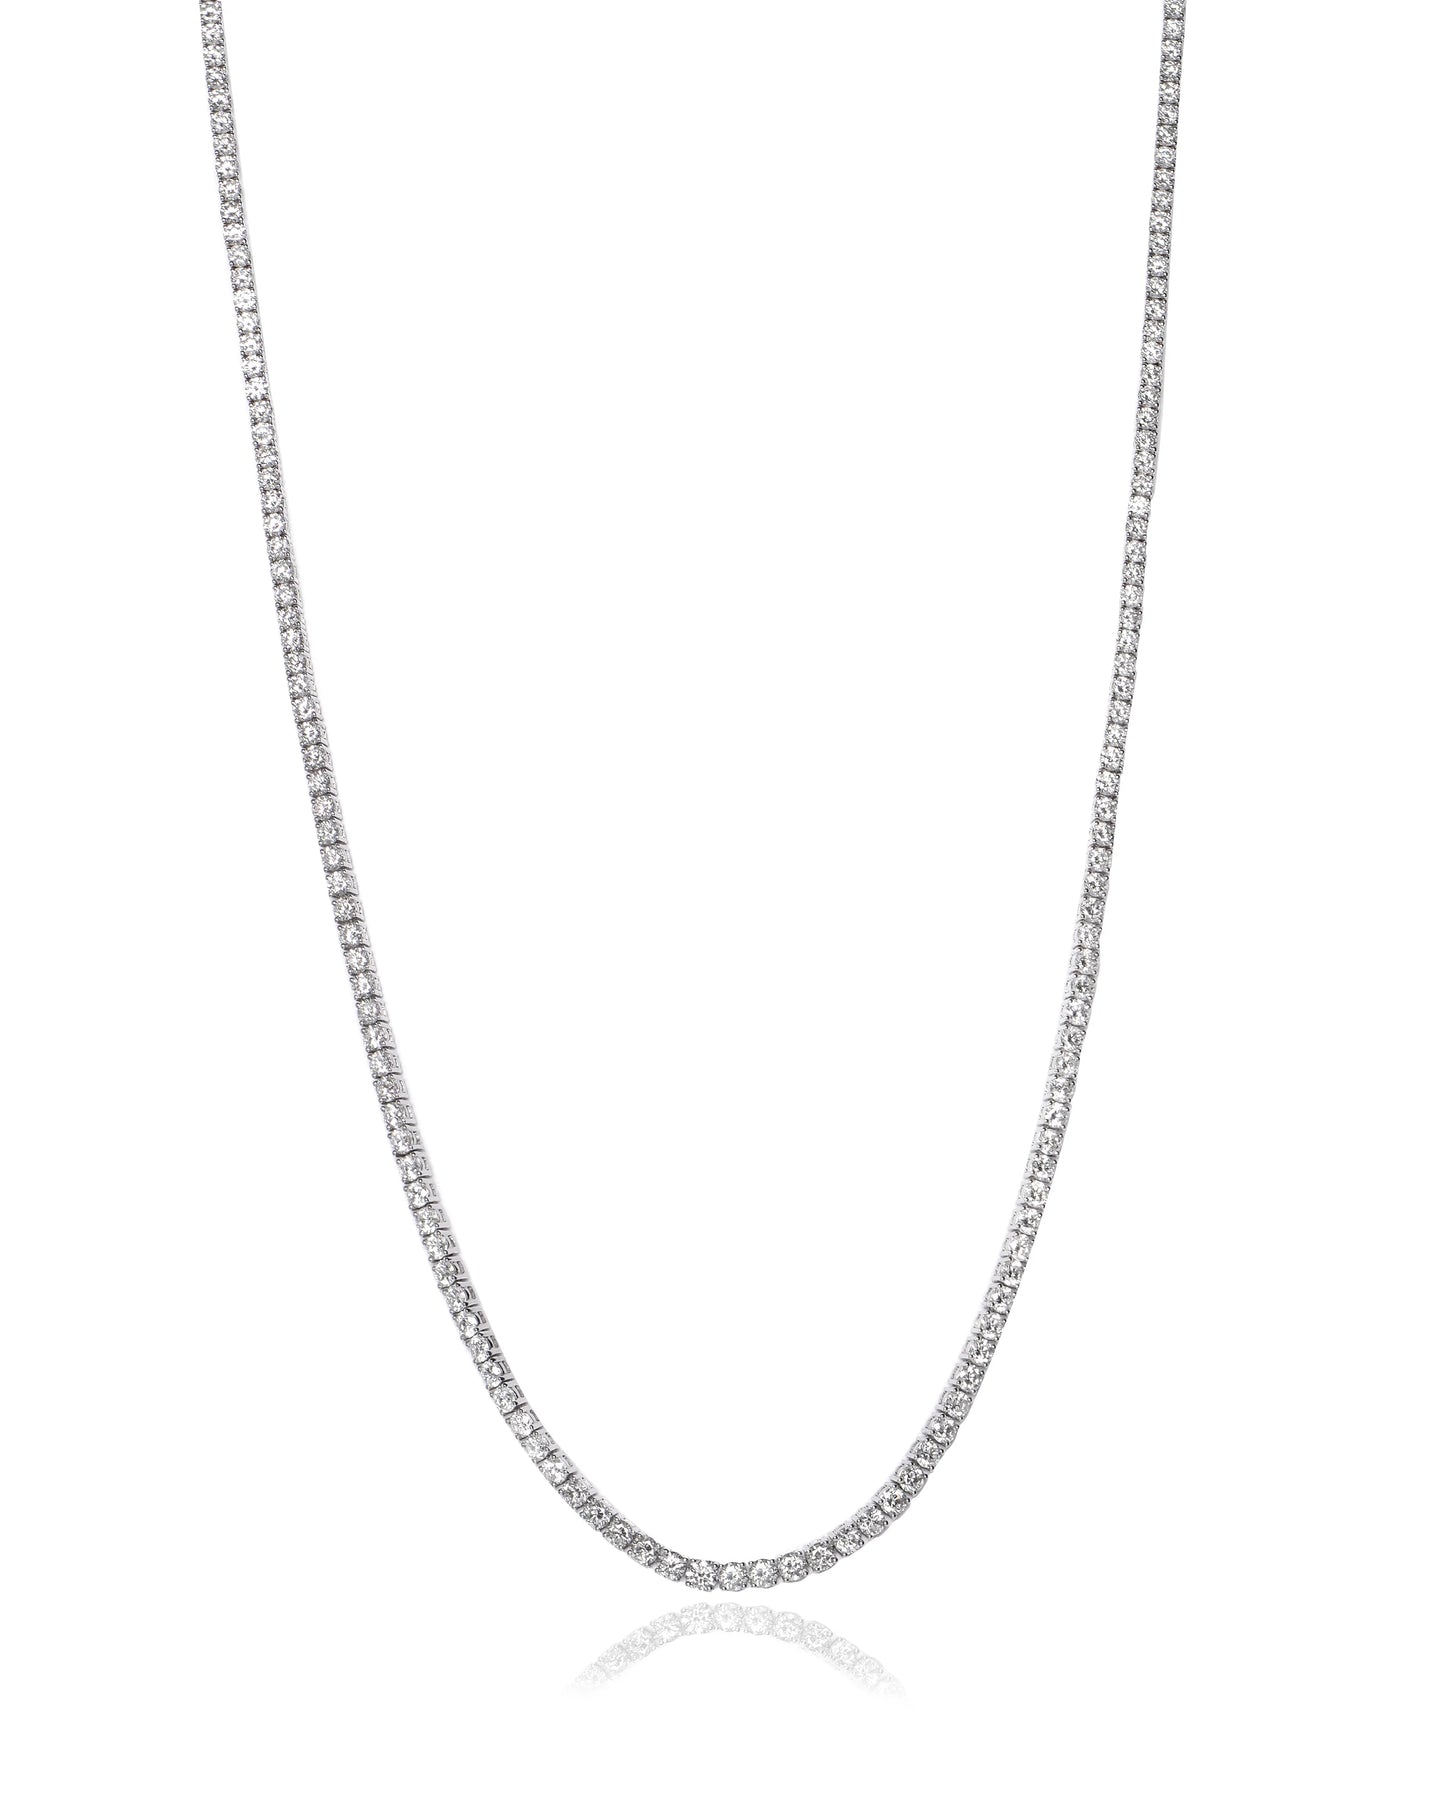 18.55ct Diamond Tennis Necklace in 18ct White Gold